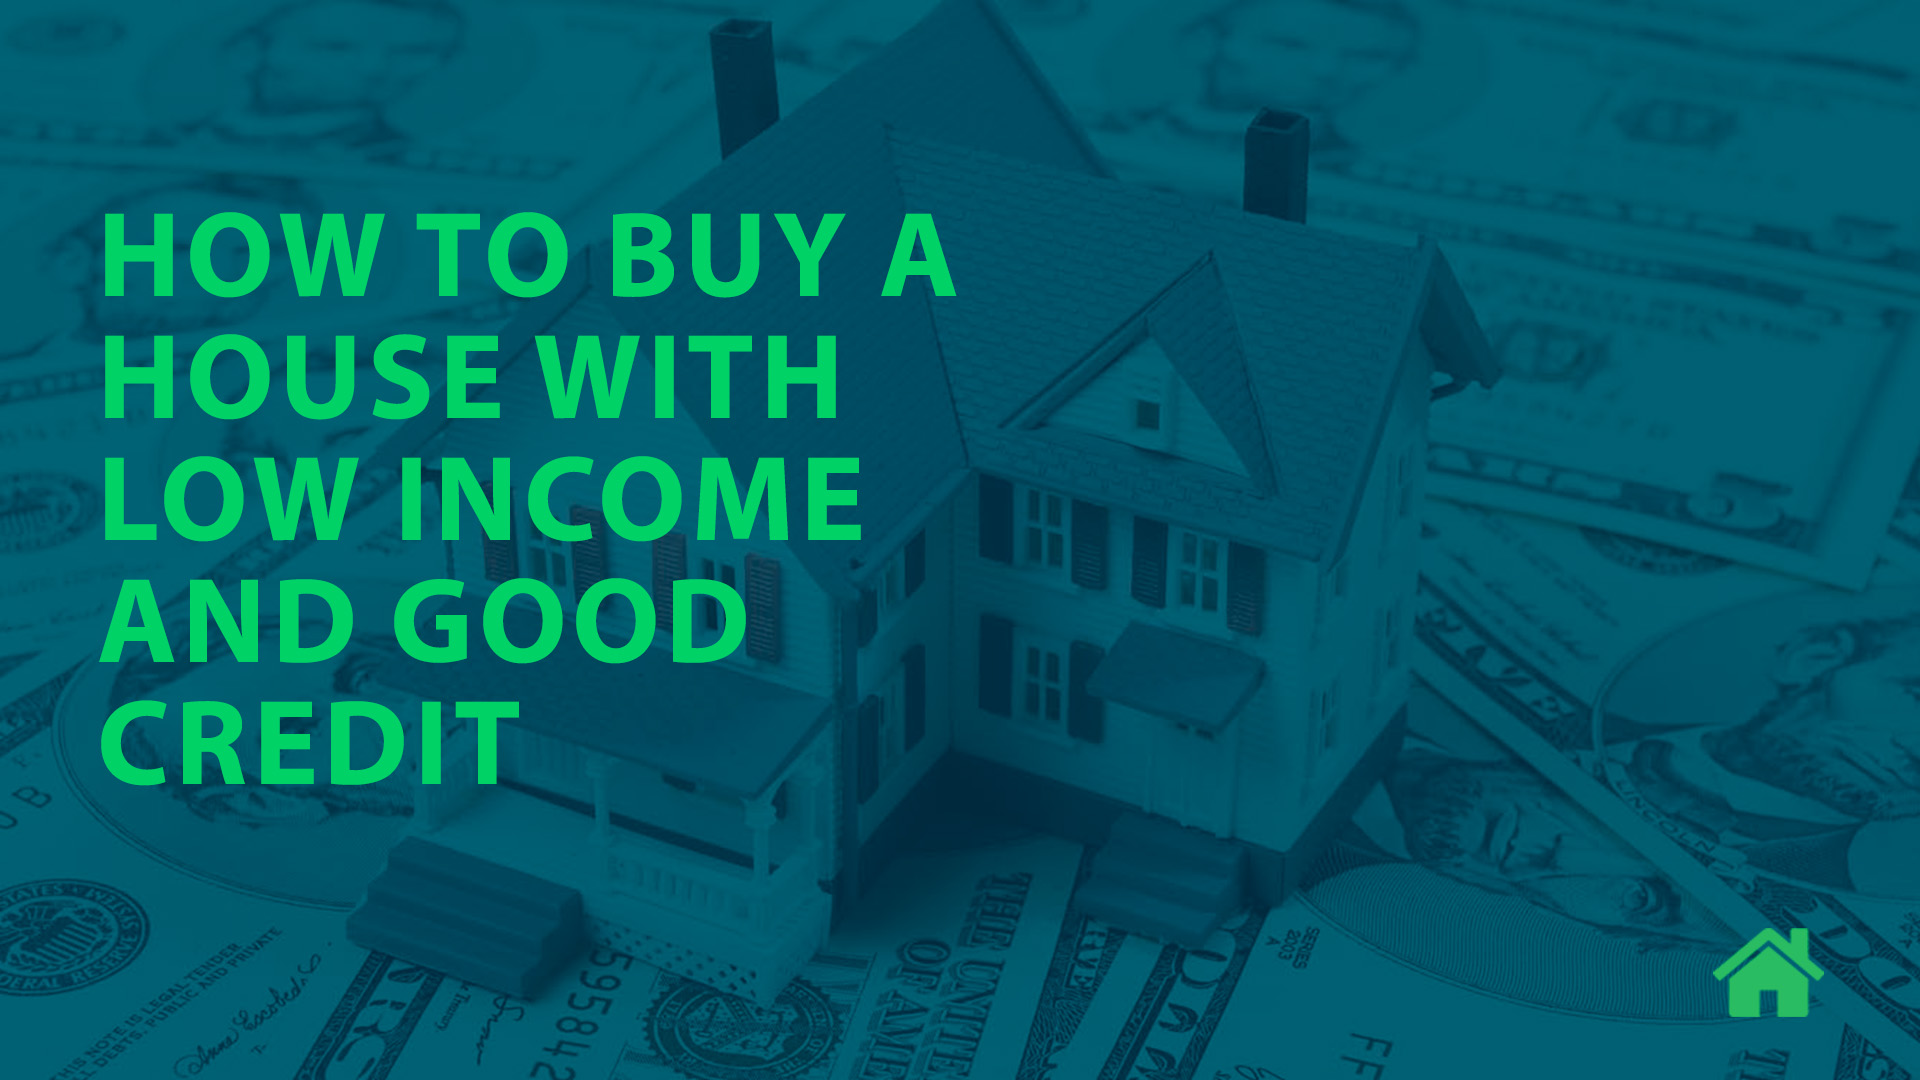 How to Buy a House with Low Income and Good Credit